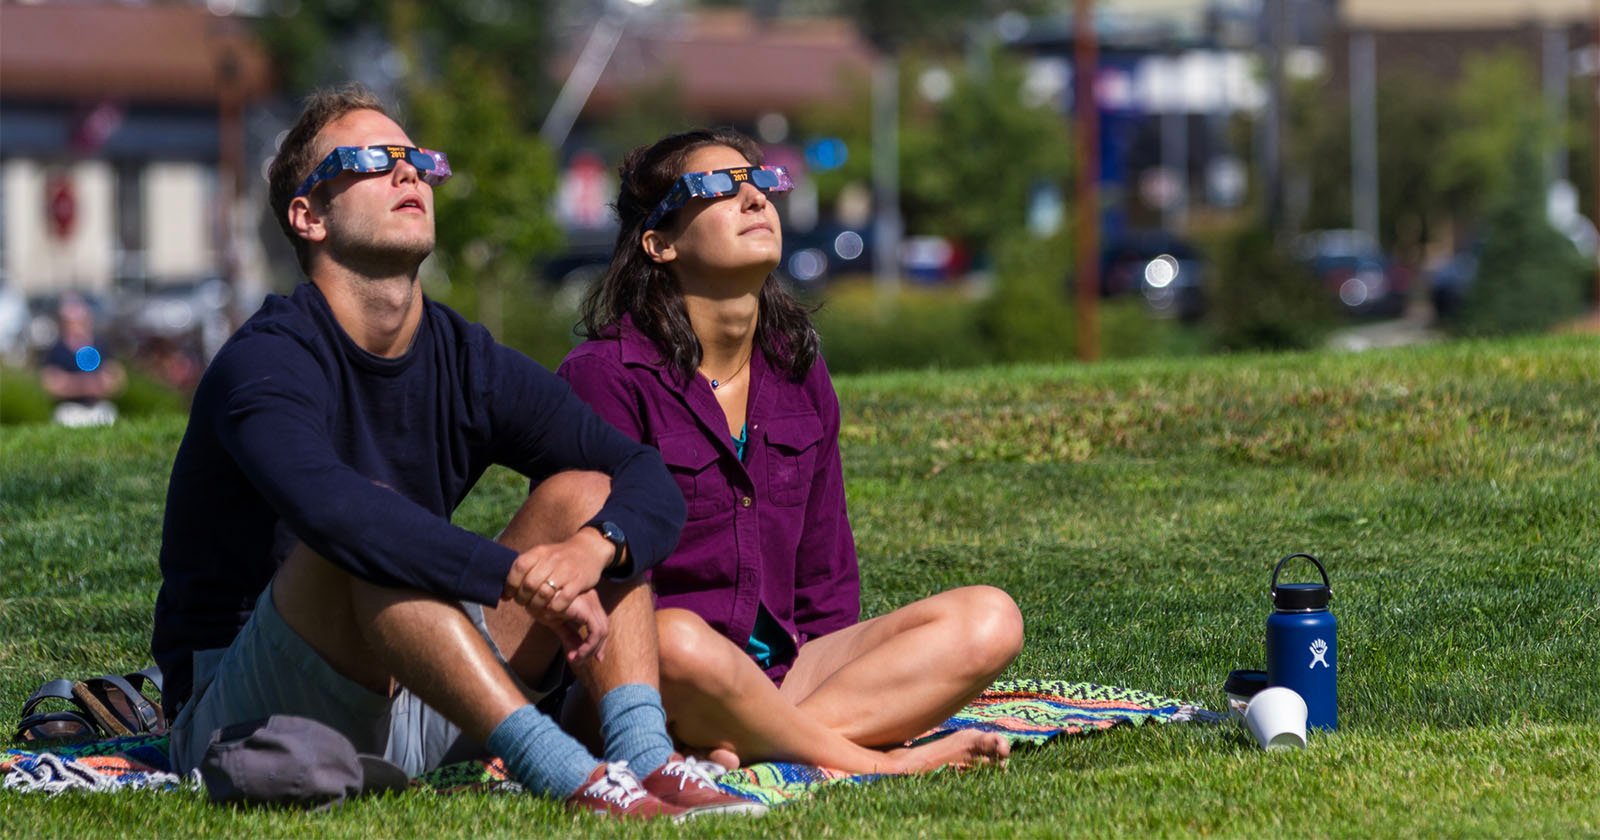 What Happens if You Look at the Solar Eclipse Directly?